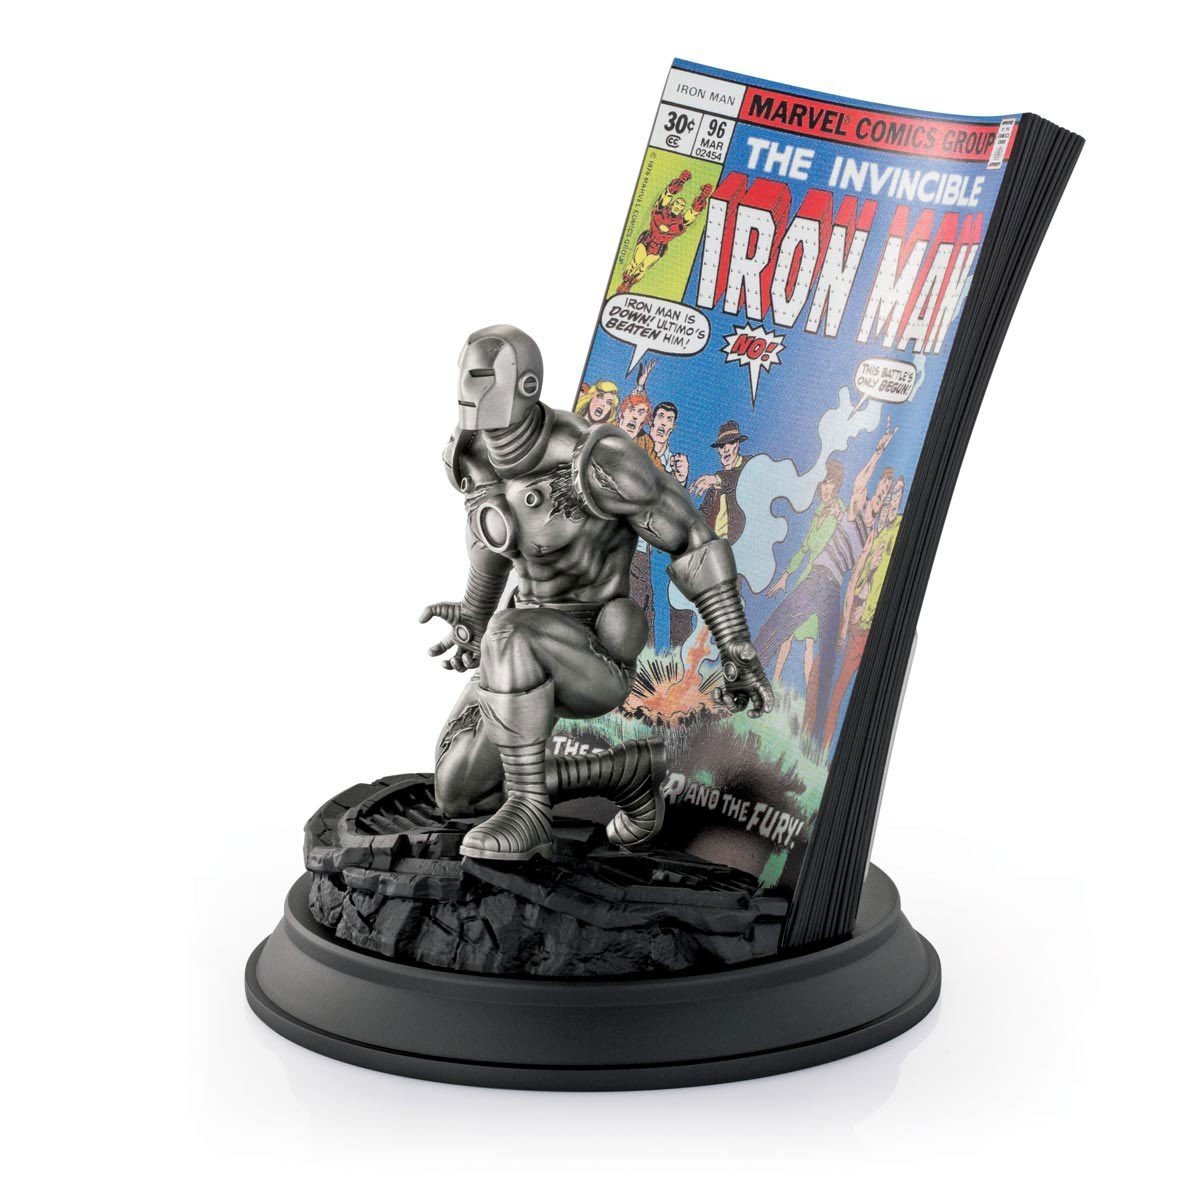 The Invincible Iron Man #96 Limited Edition Figurine - Marvel Statue